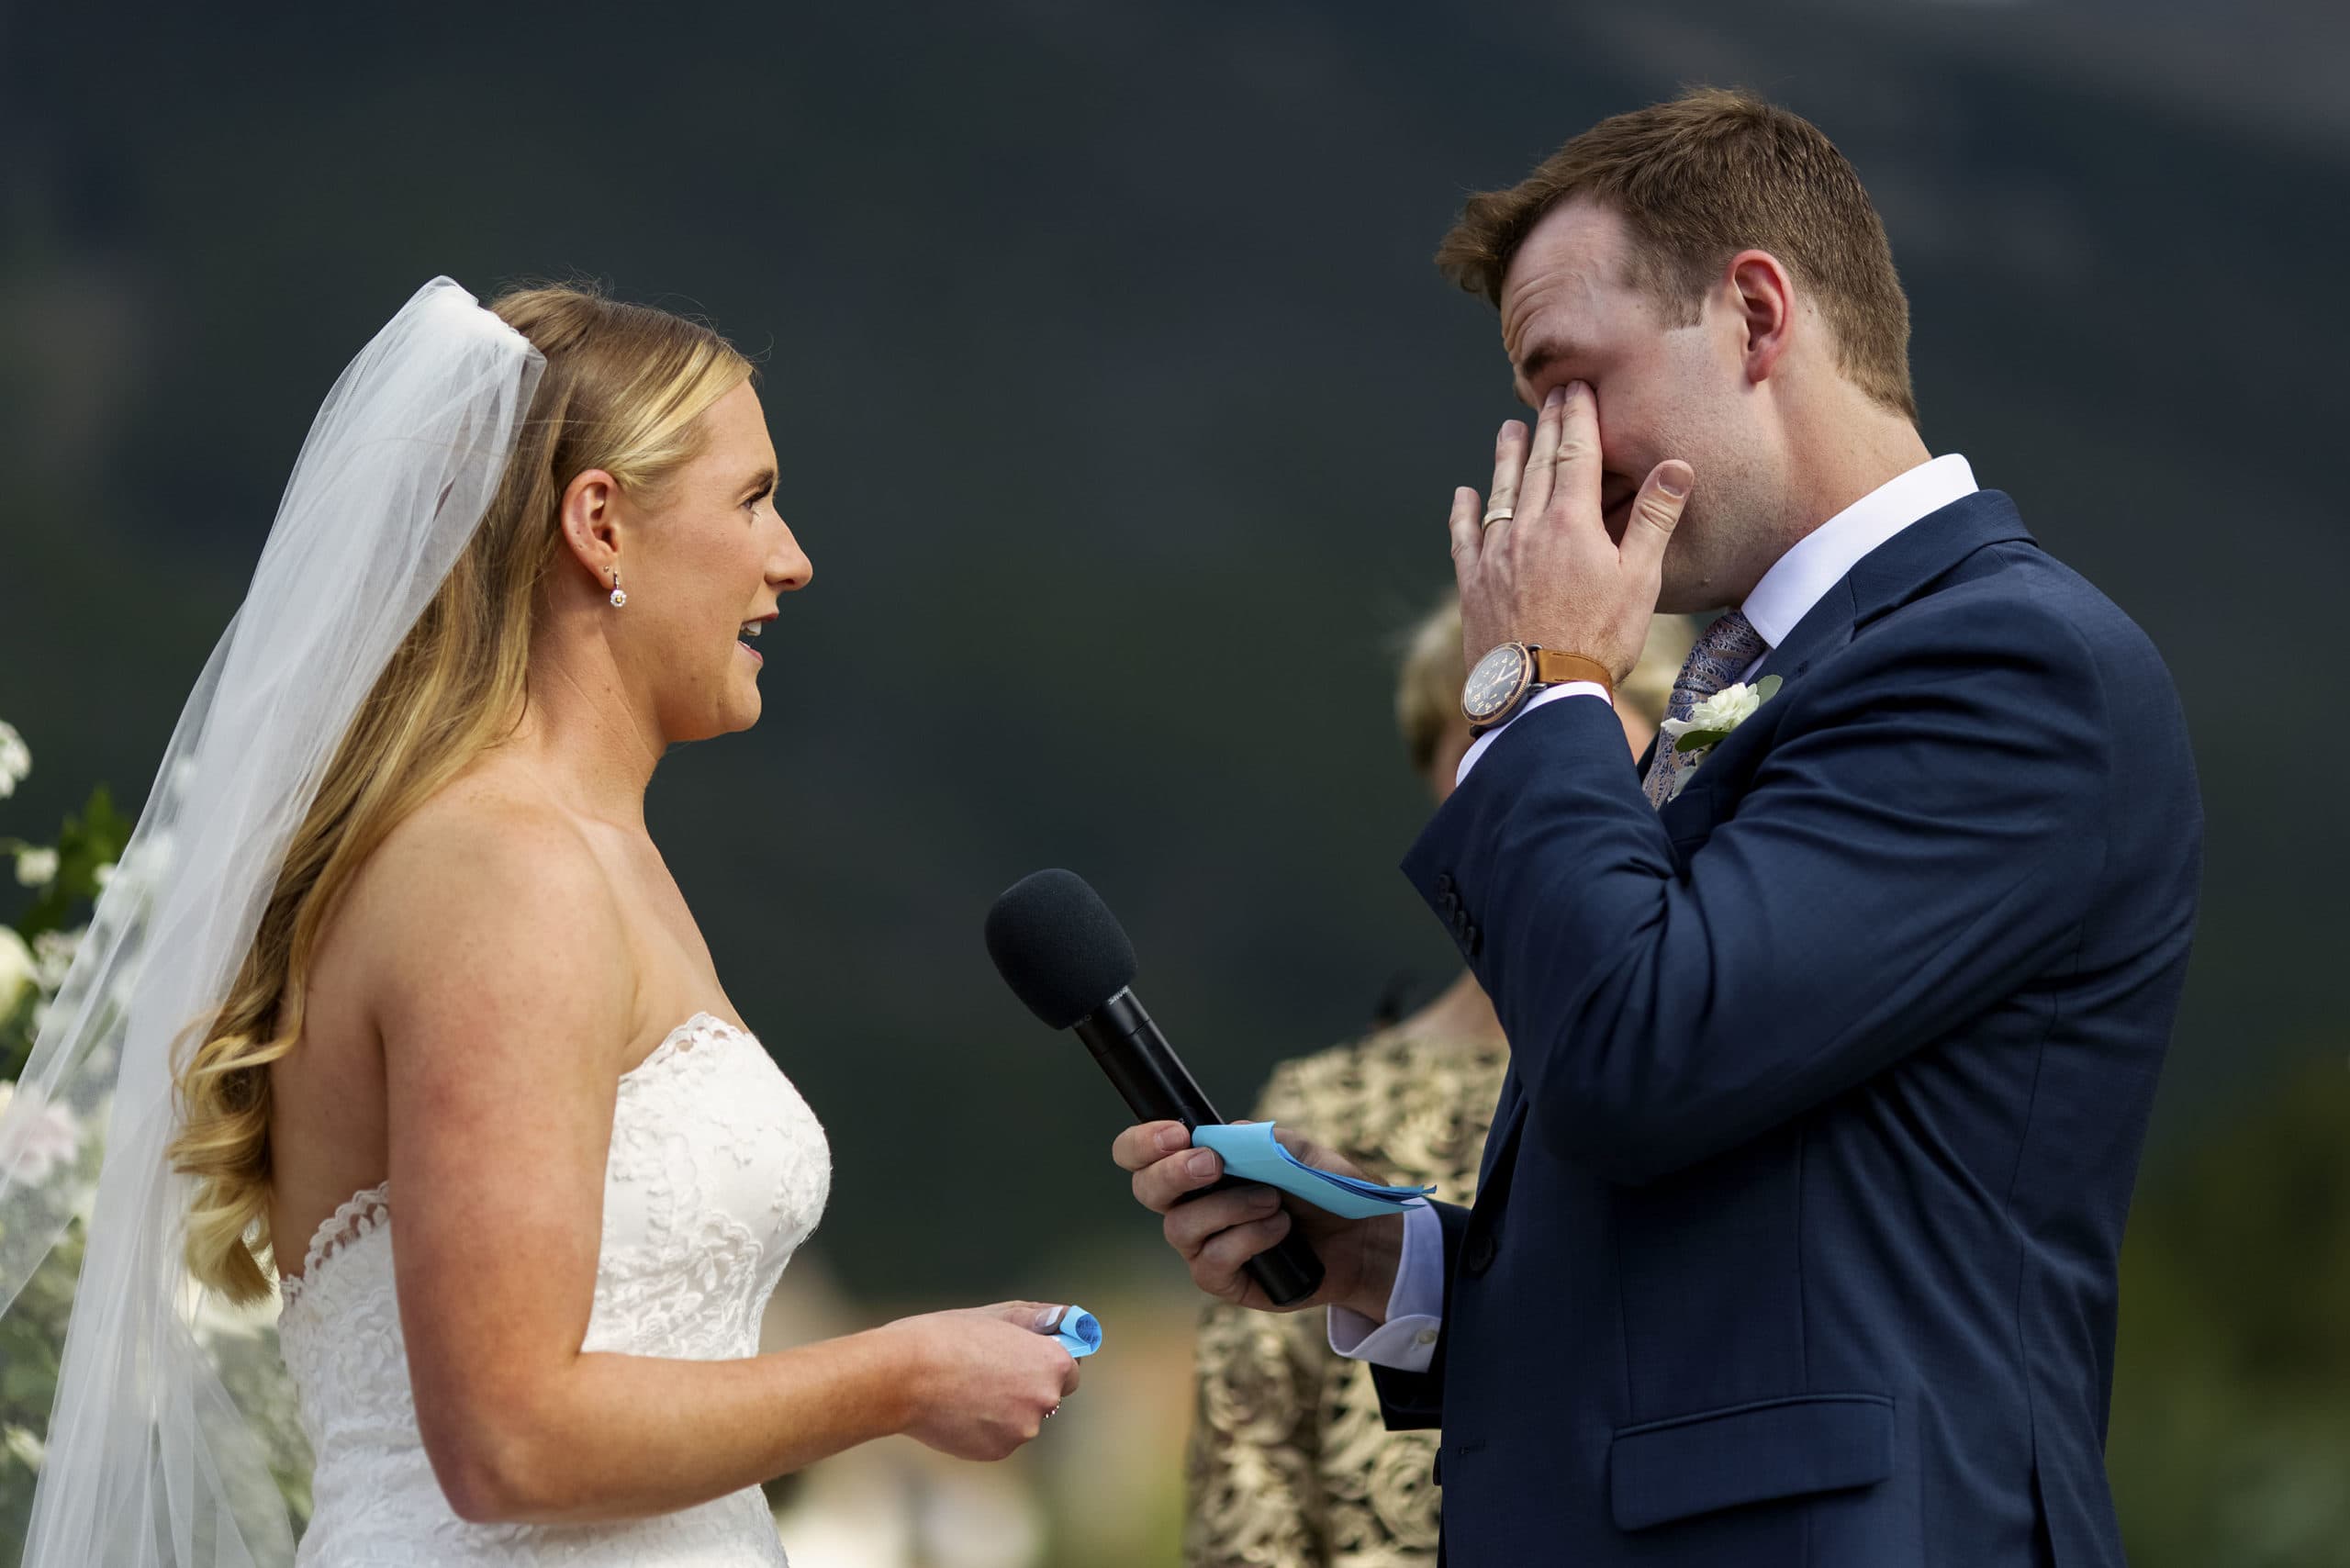 The groom wipes away a tear while the bride reads her vows